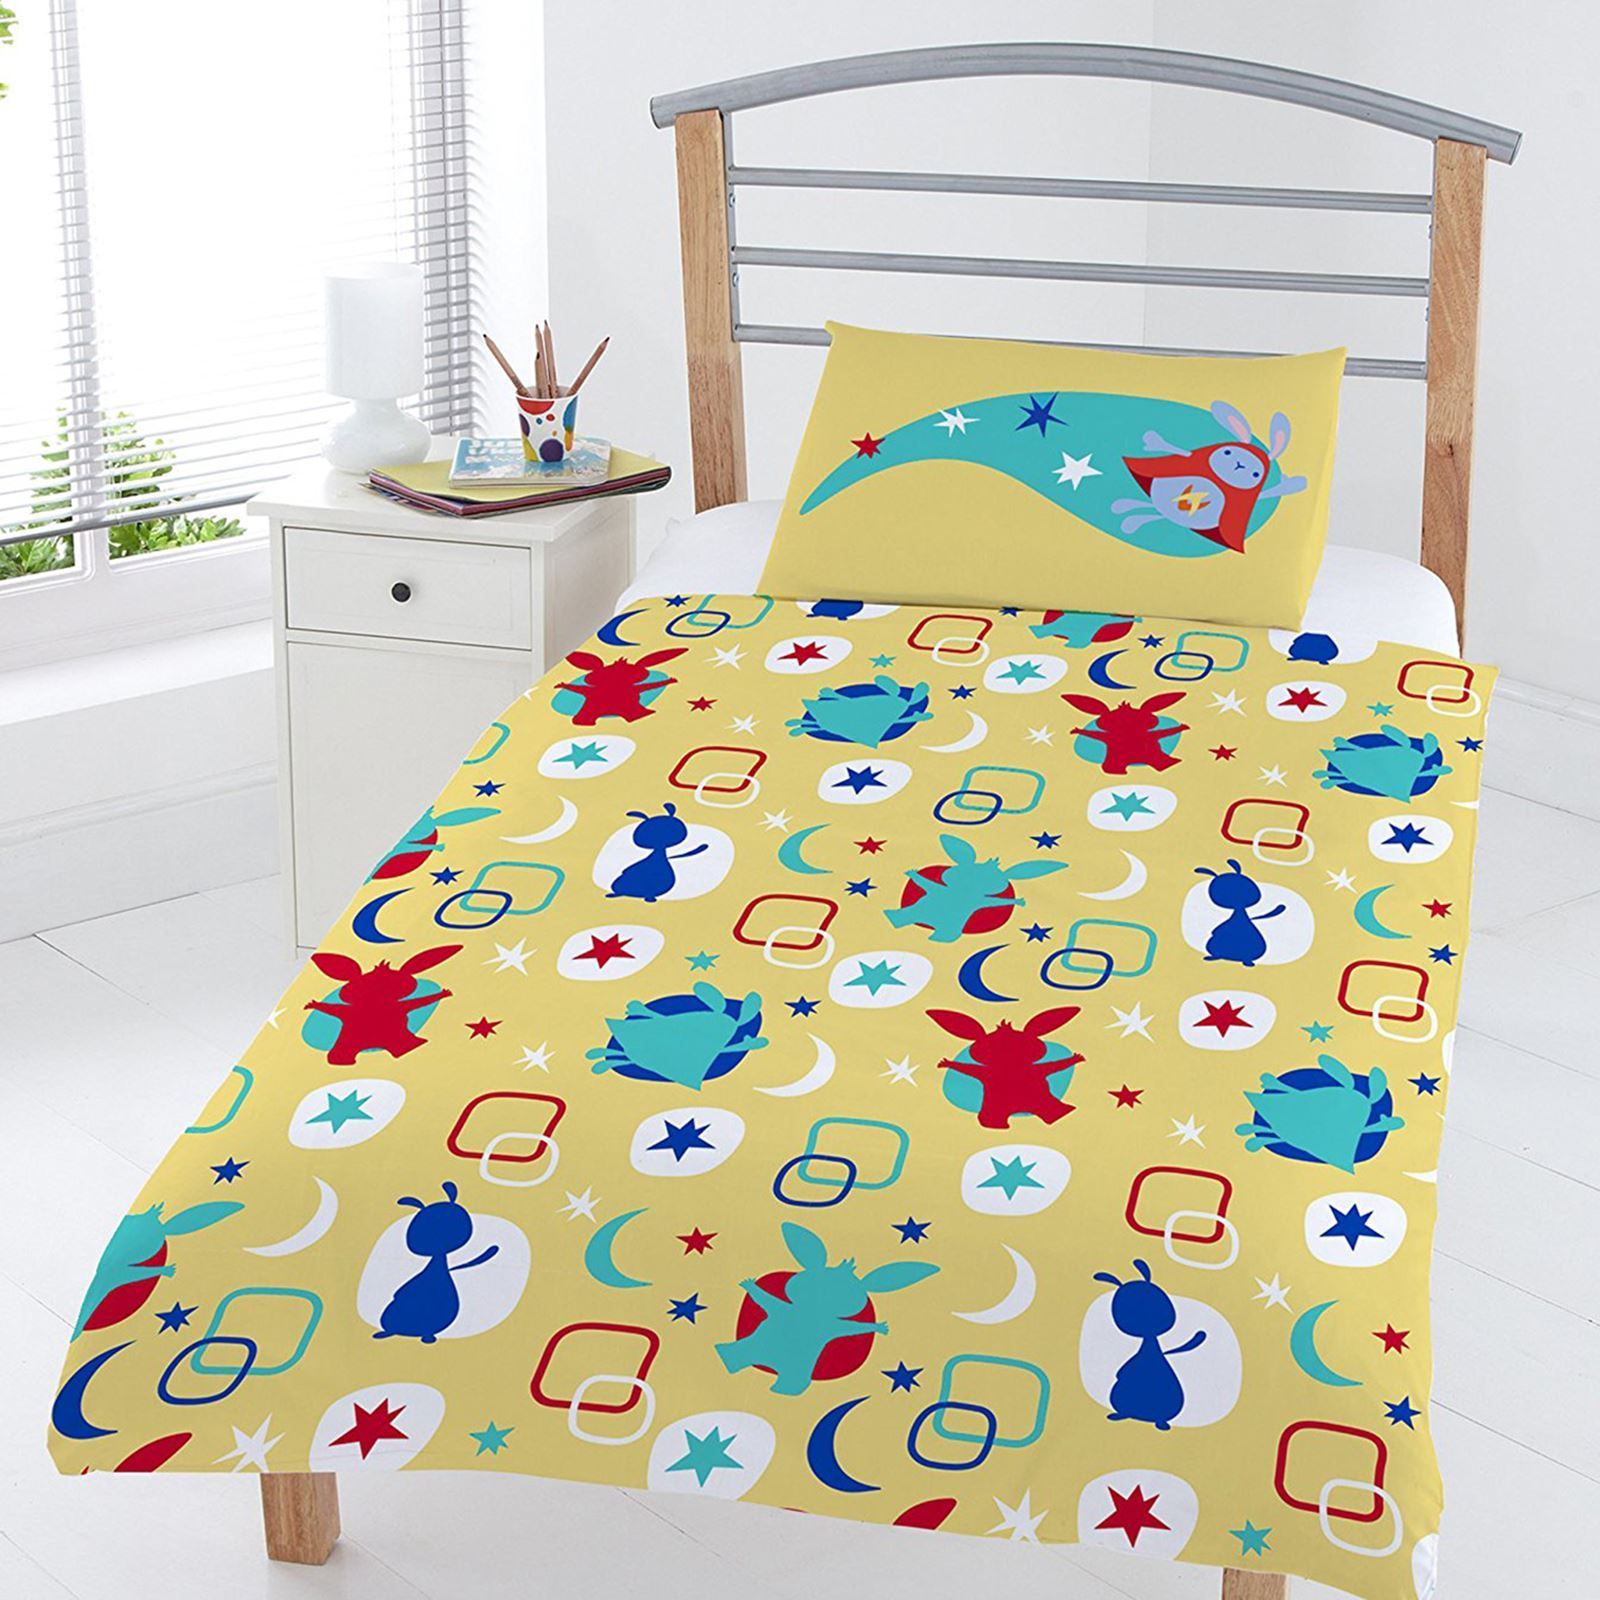 Bing Bunny Polycotton Rotary Junior Cot Bed Duvet Quilt Cover Set